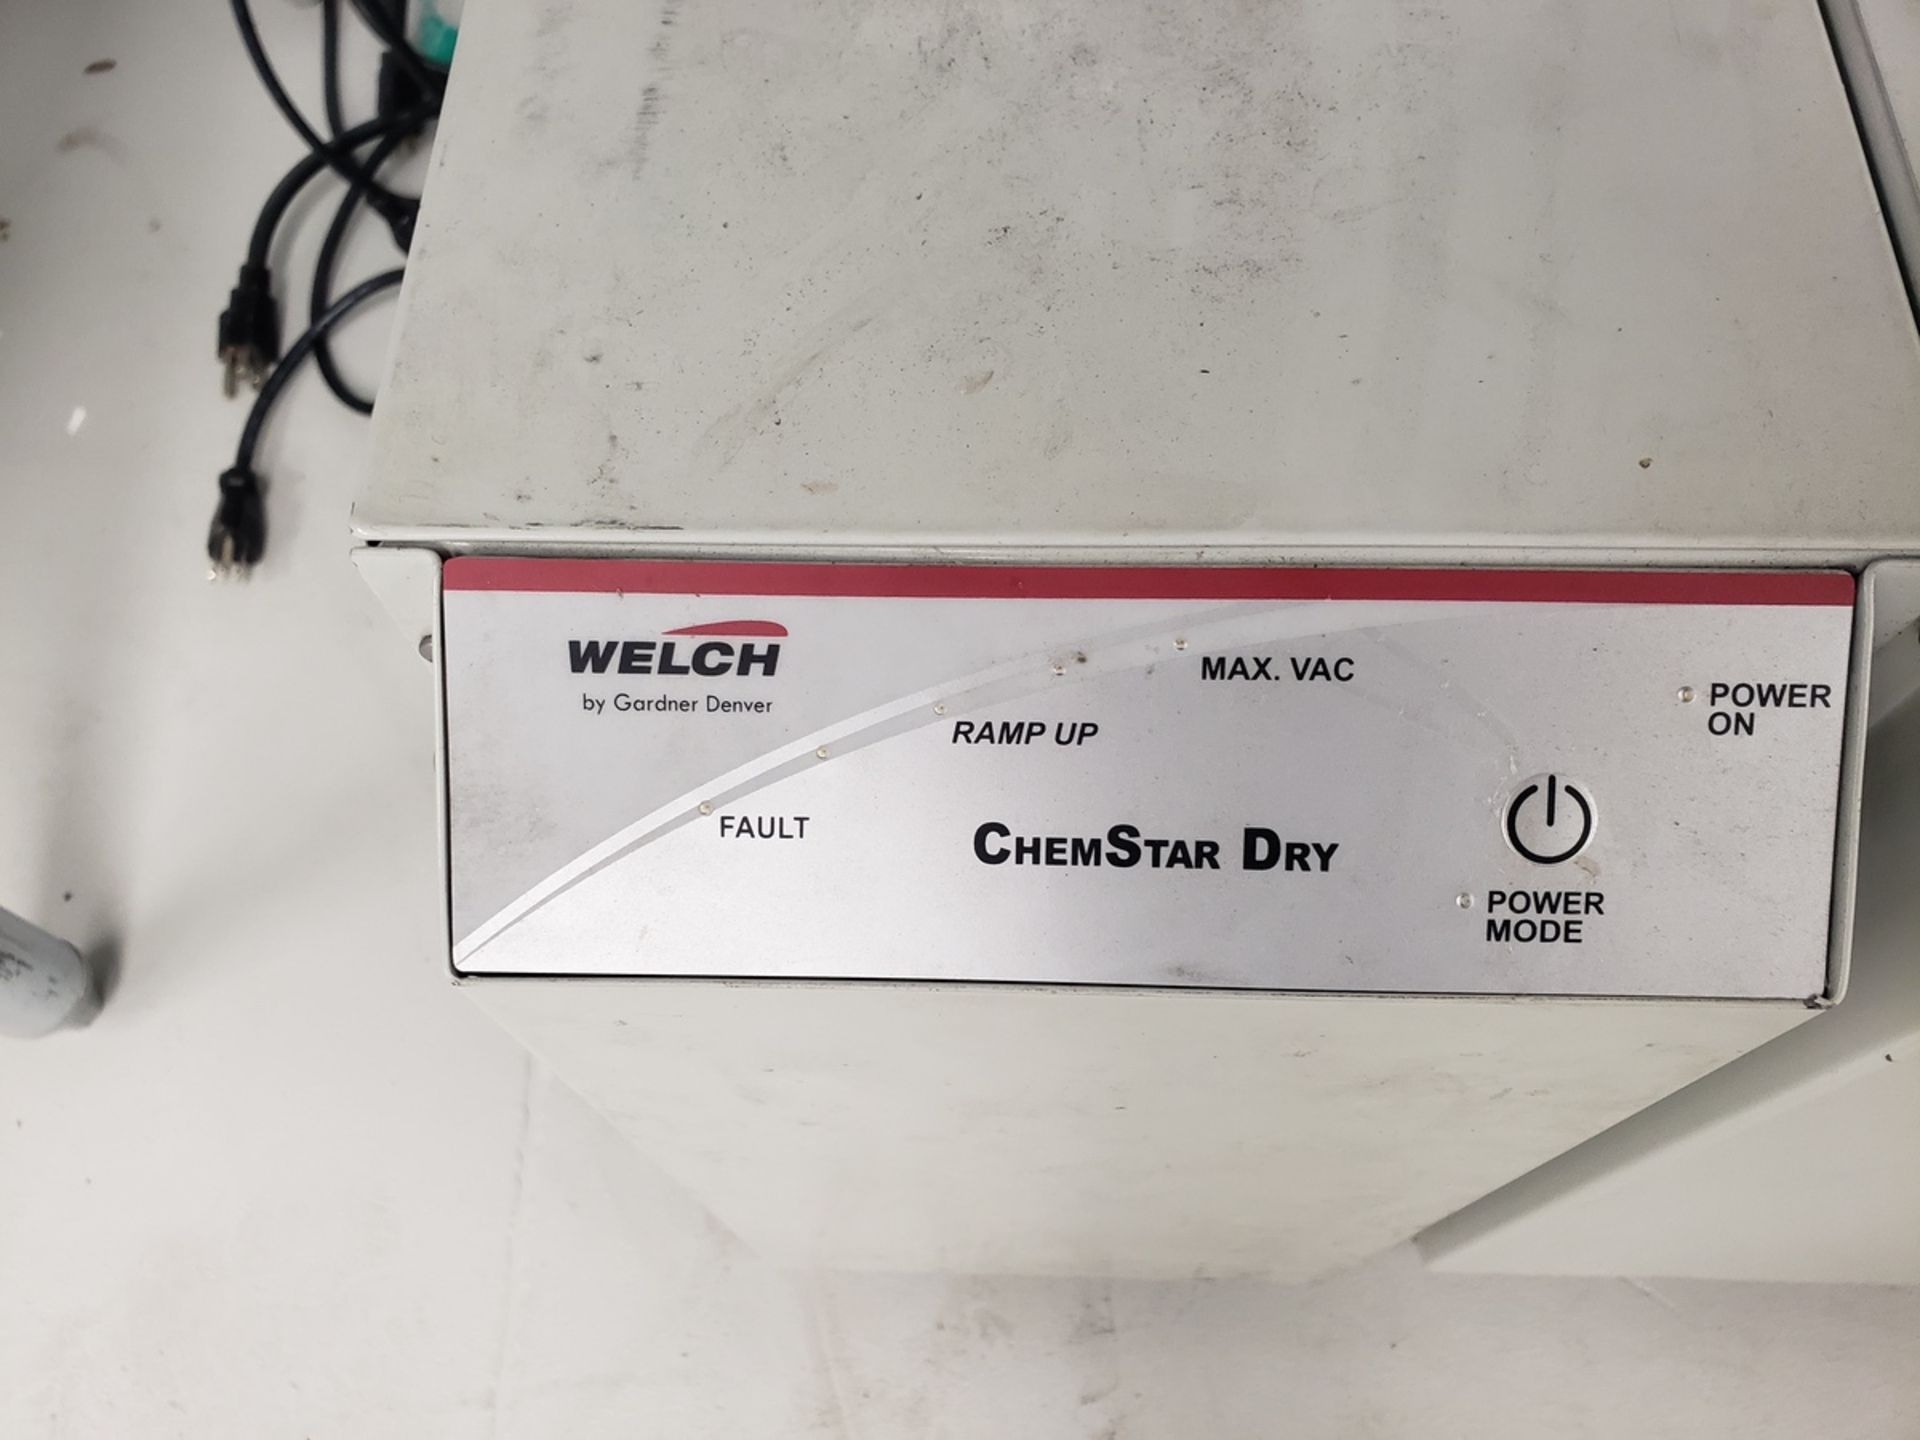 Lot of (2) Welch ChemStar Dry Vacuum Pump System, M# 2070B-01 | Rig Fee $35 - Image 2 of 3